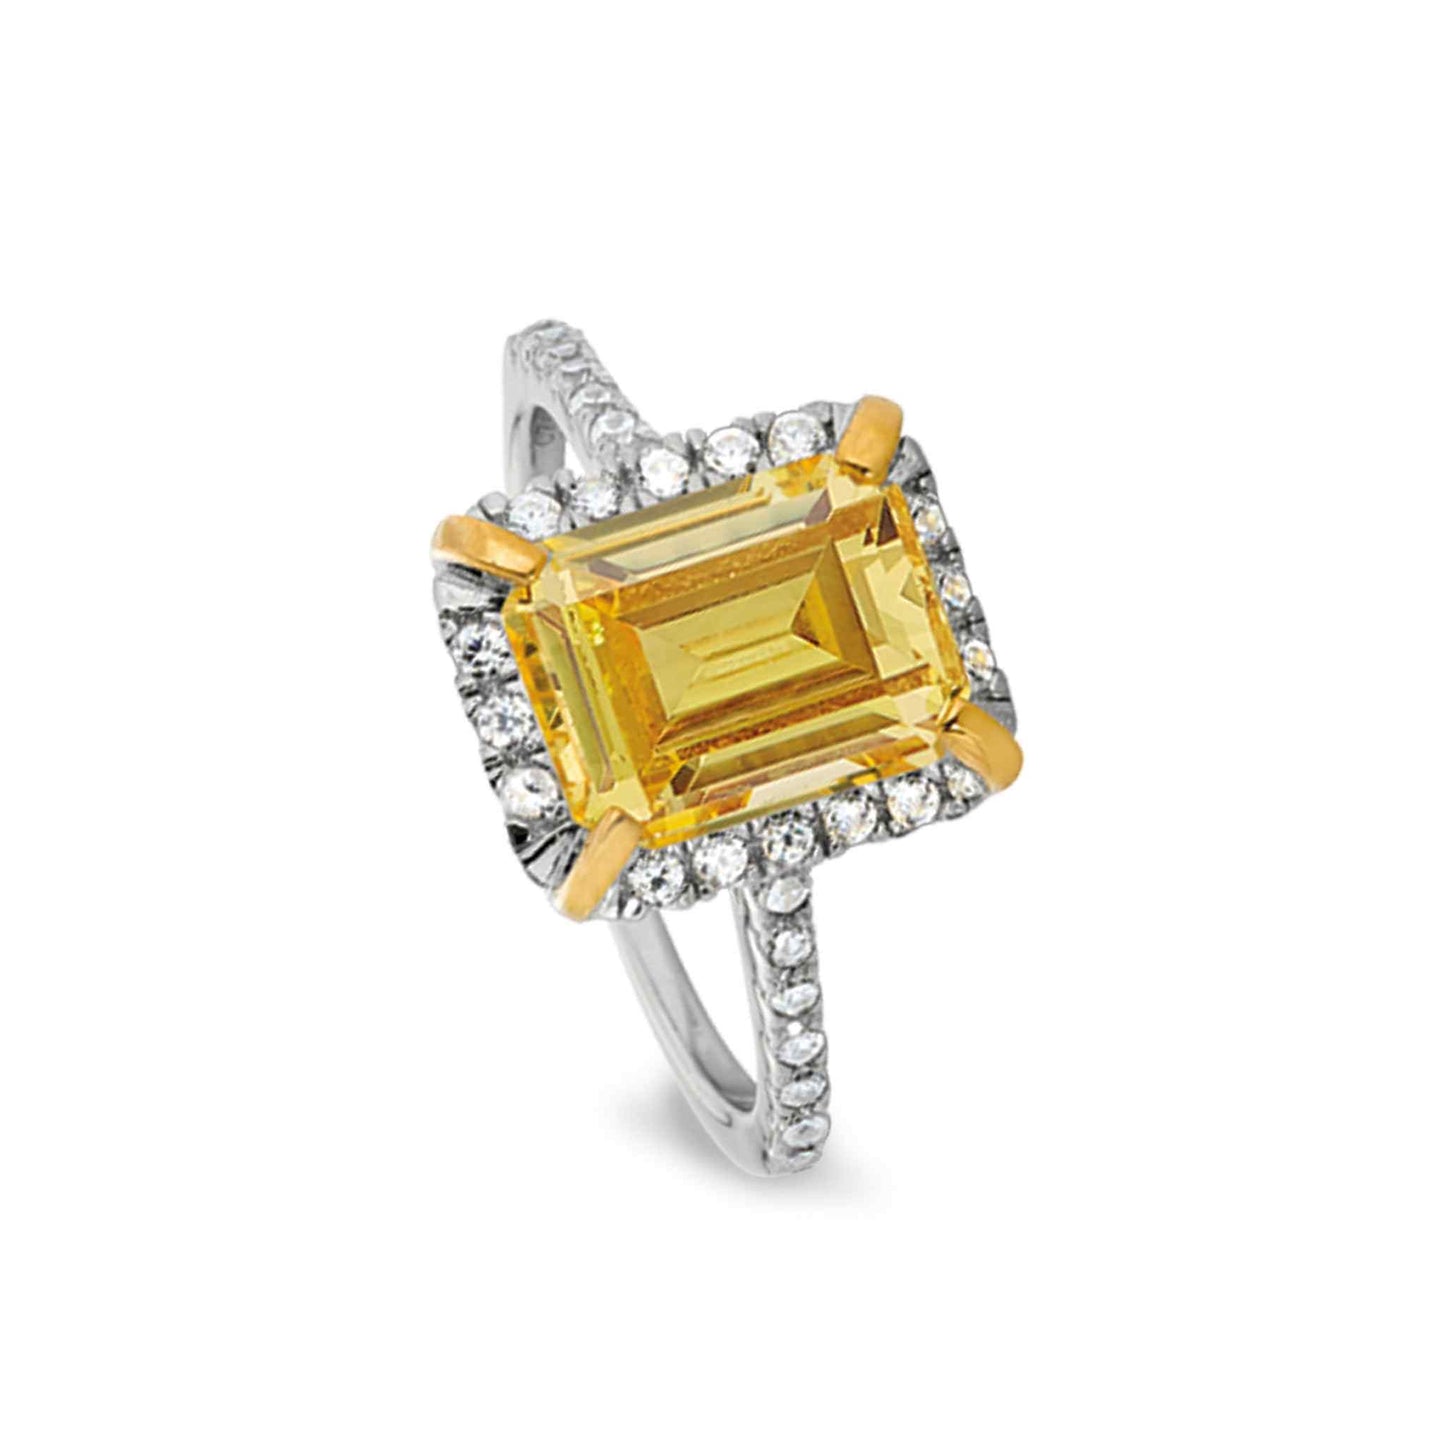 A vintage-style ring with emerald cut canary stone & simulated diamonds displayed on a neutral white background.